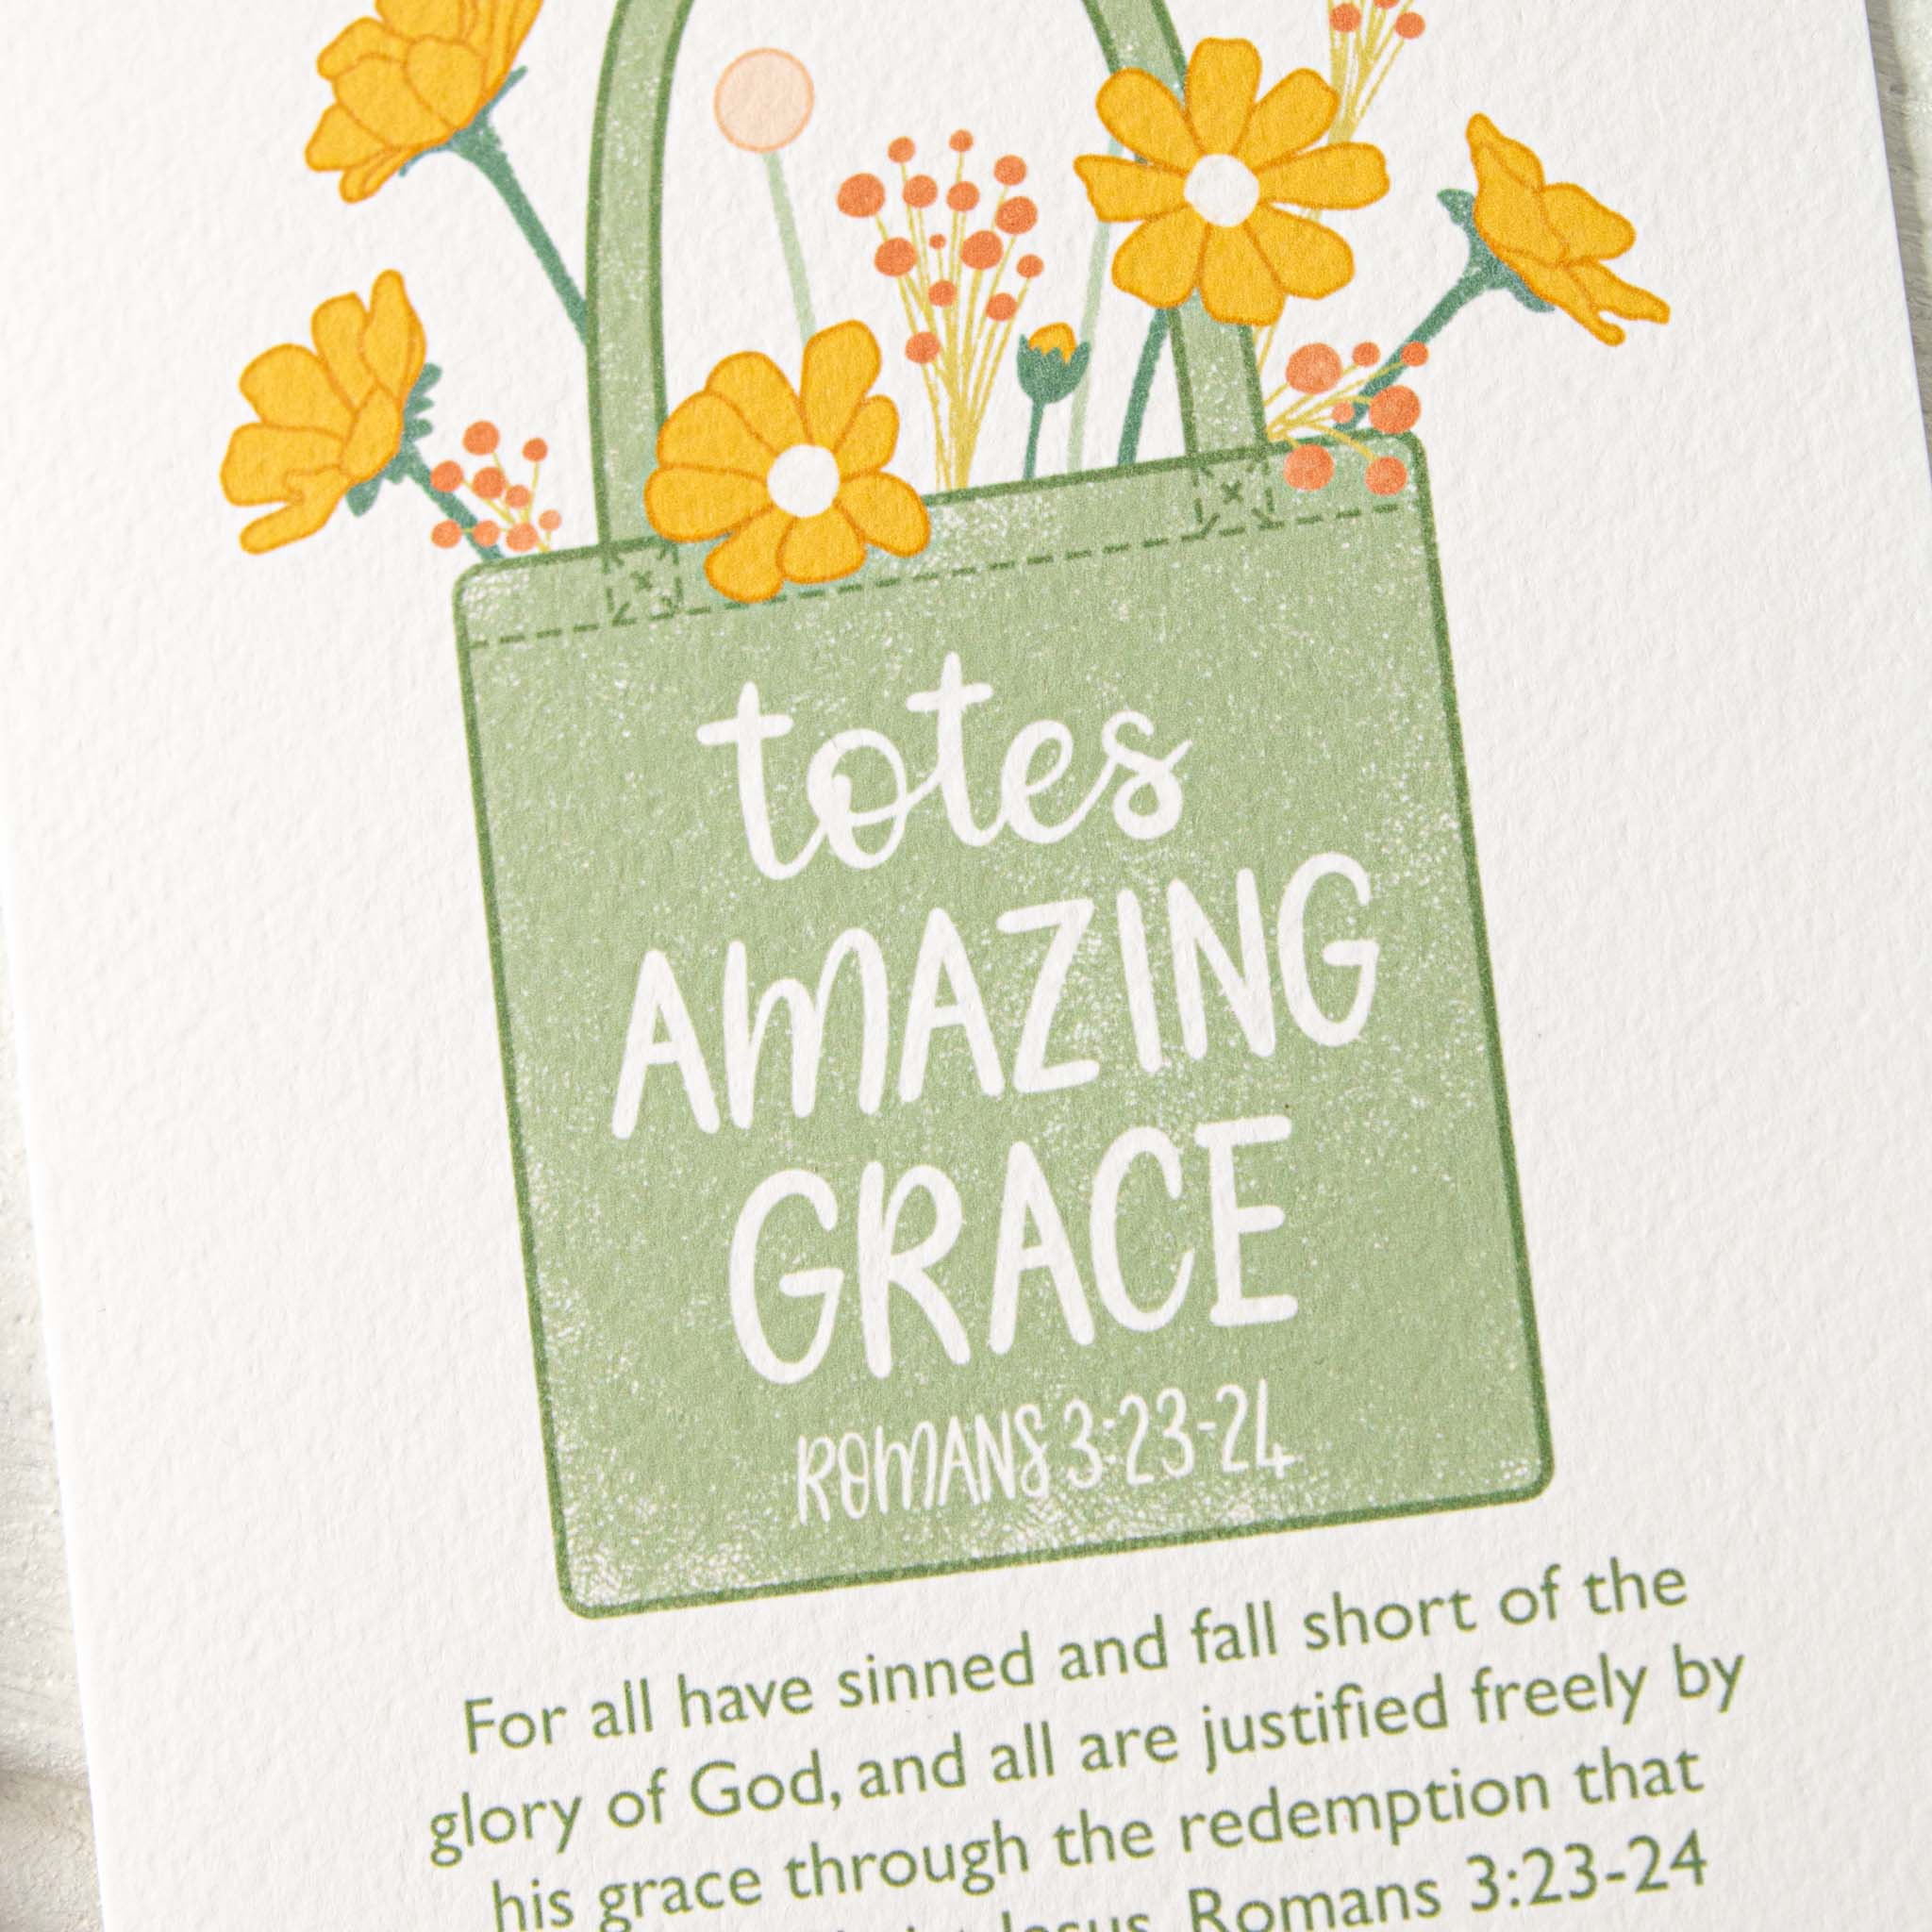 Closeup of the textured Totes Amazing Grace Card